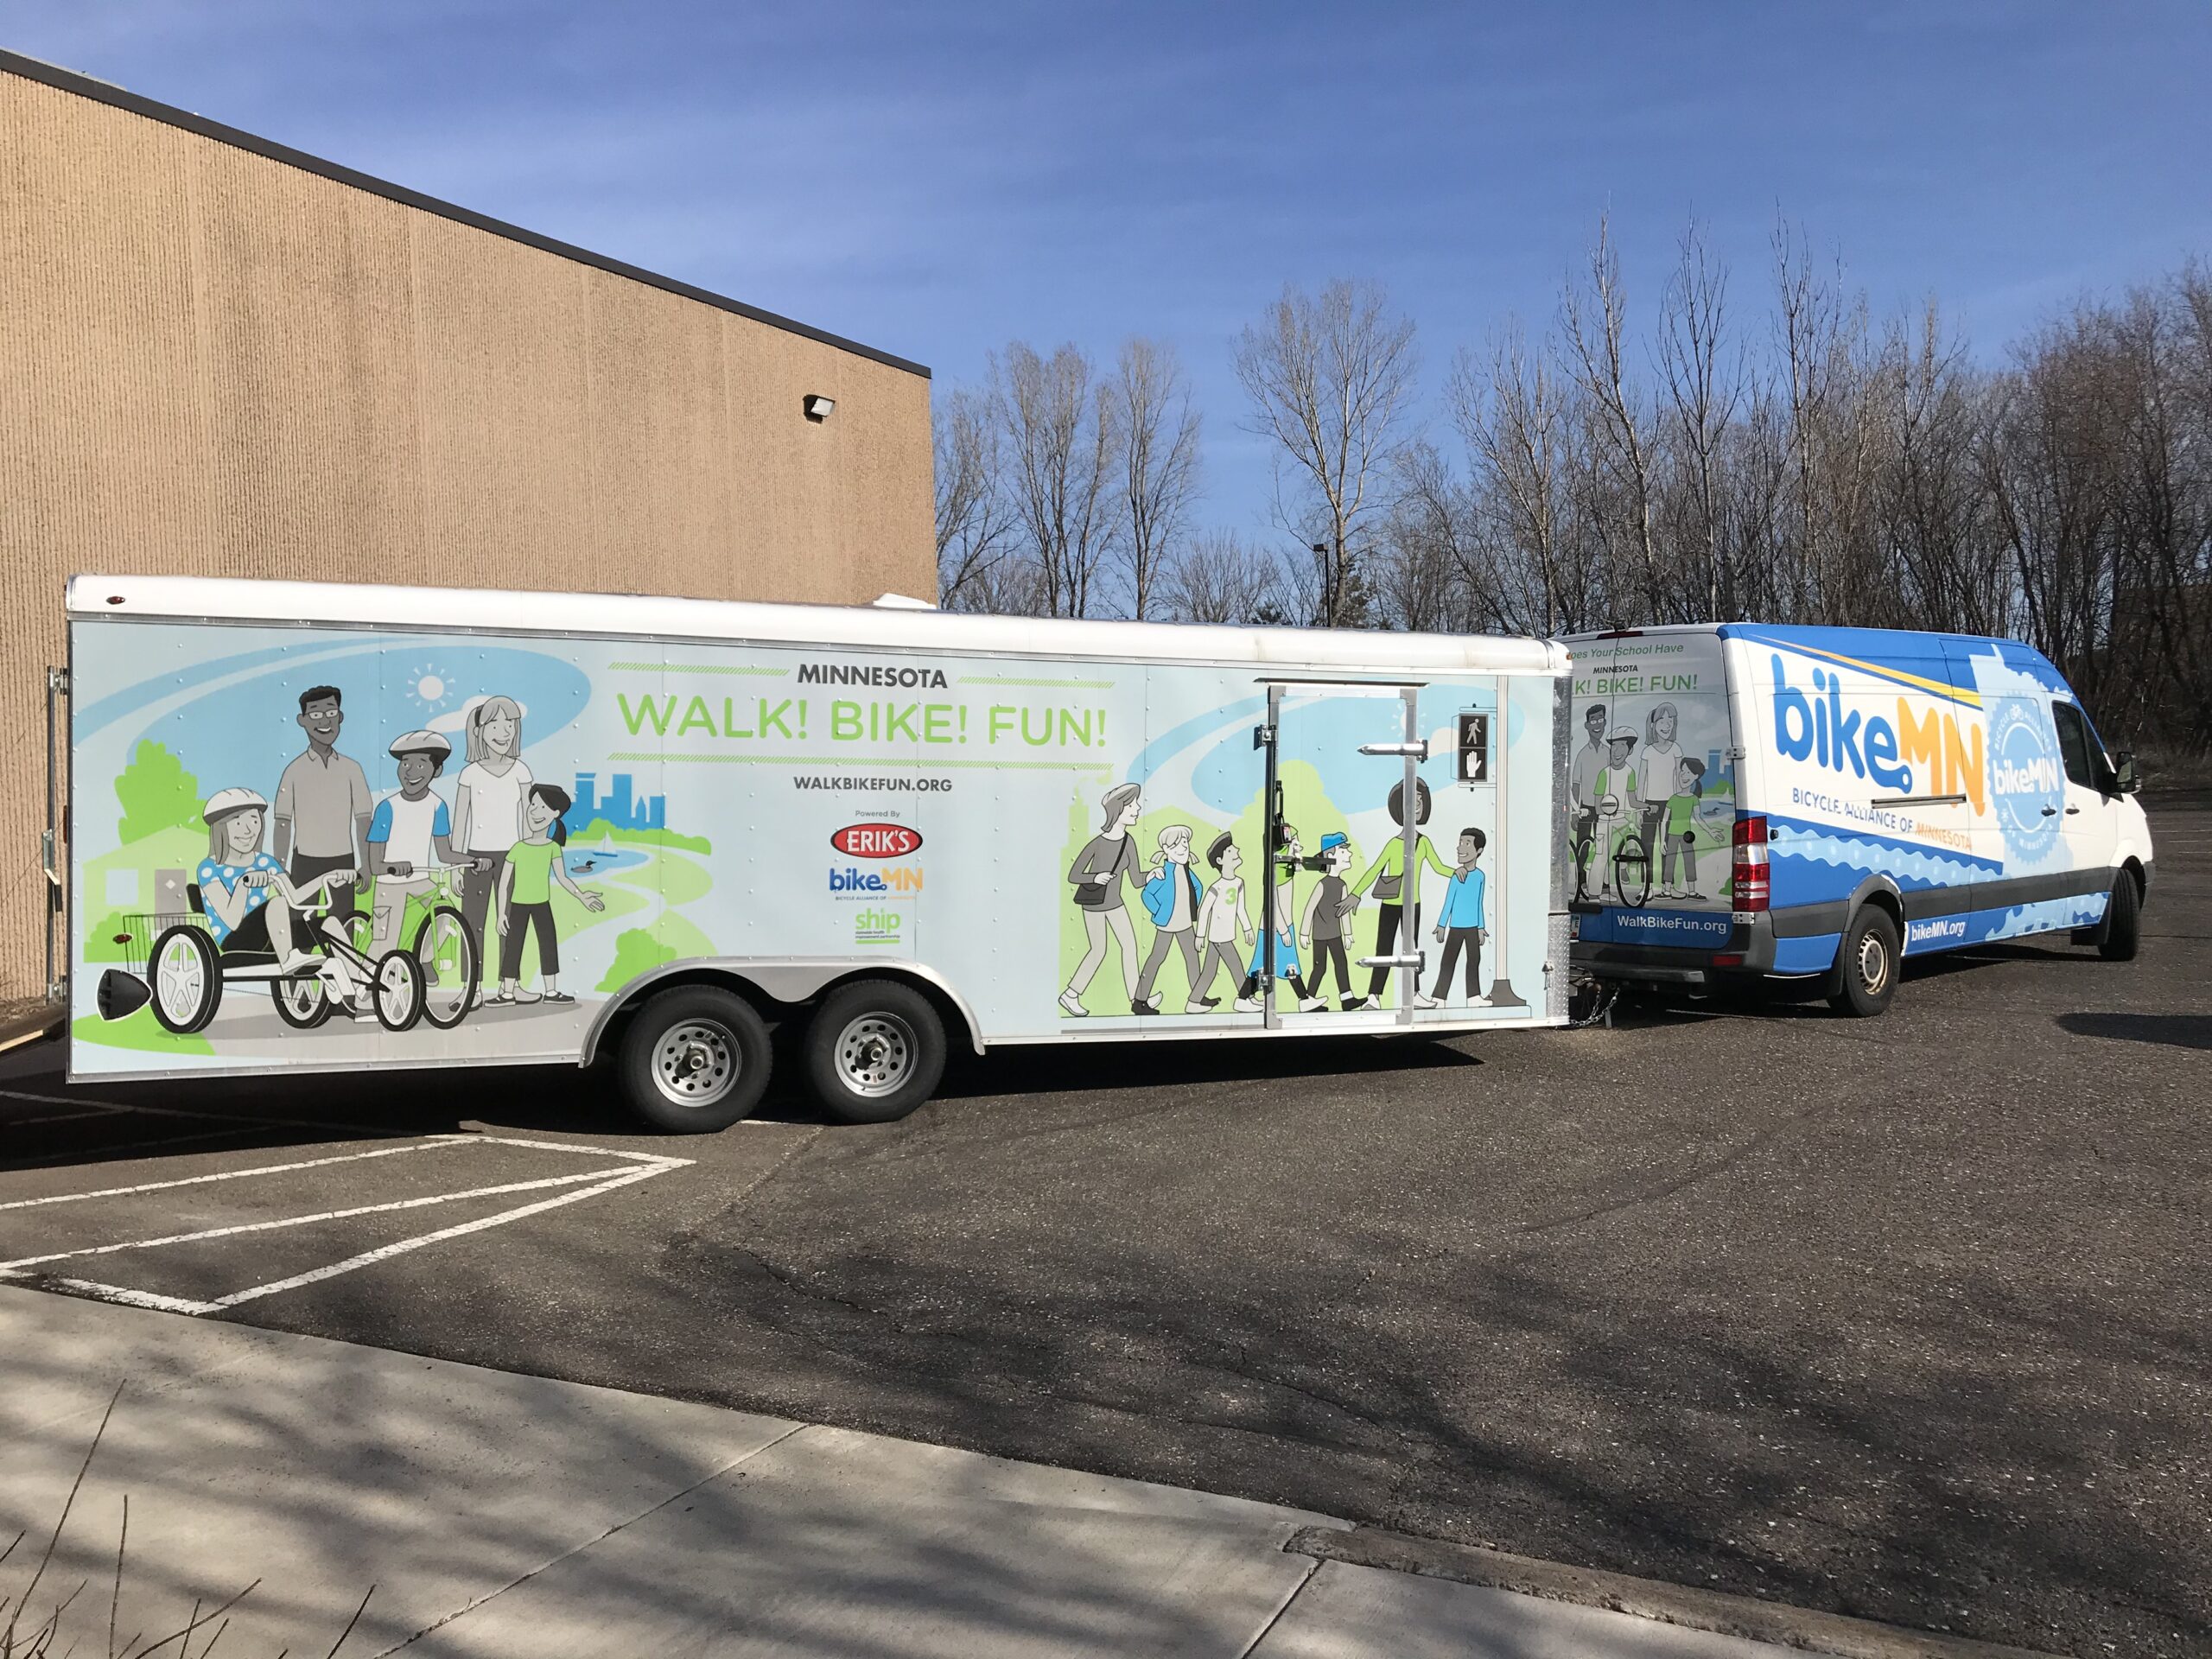 The BikeMN van and trailer in all of its glory!